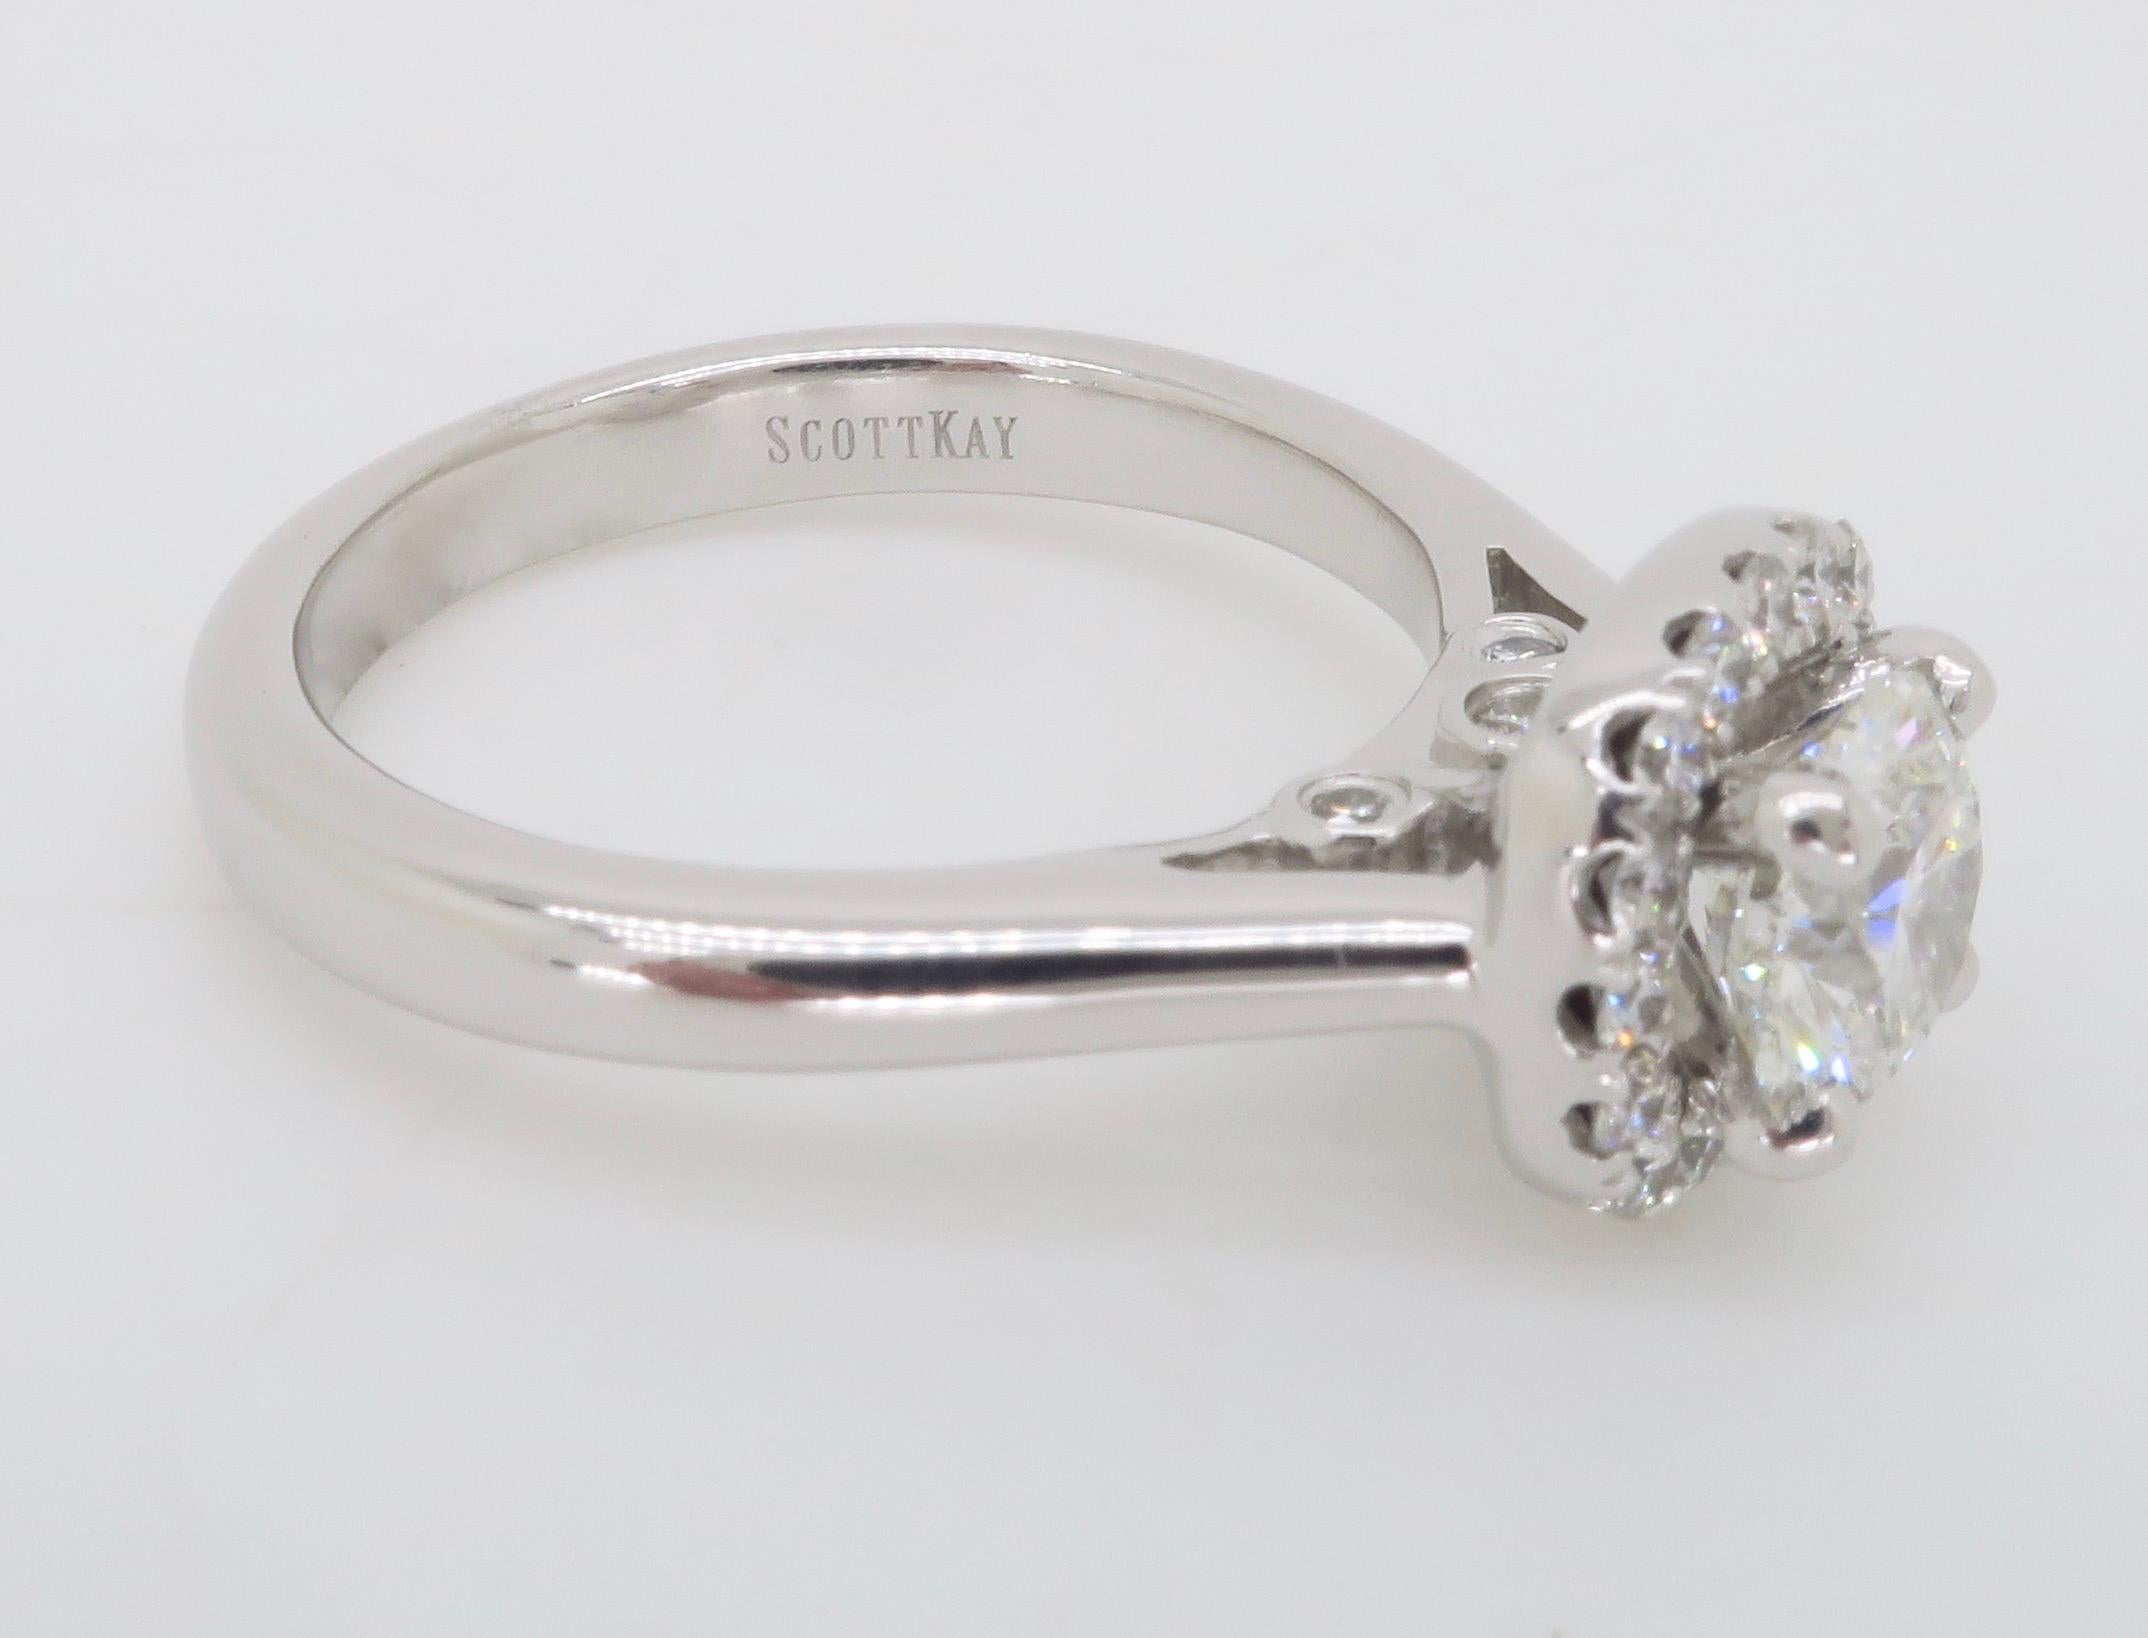 GIA Certified Round Brilliant Cut Diamond in a Stunning Scott Kay Halo Setting  For Sale 11